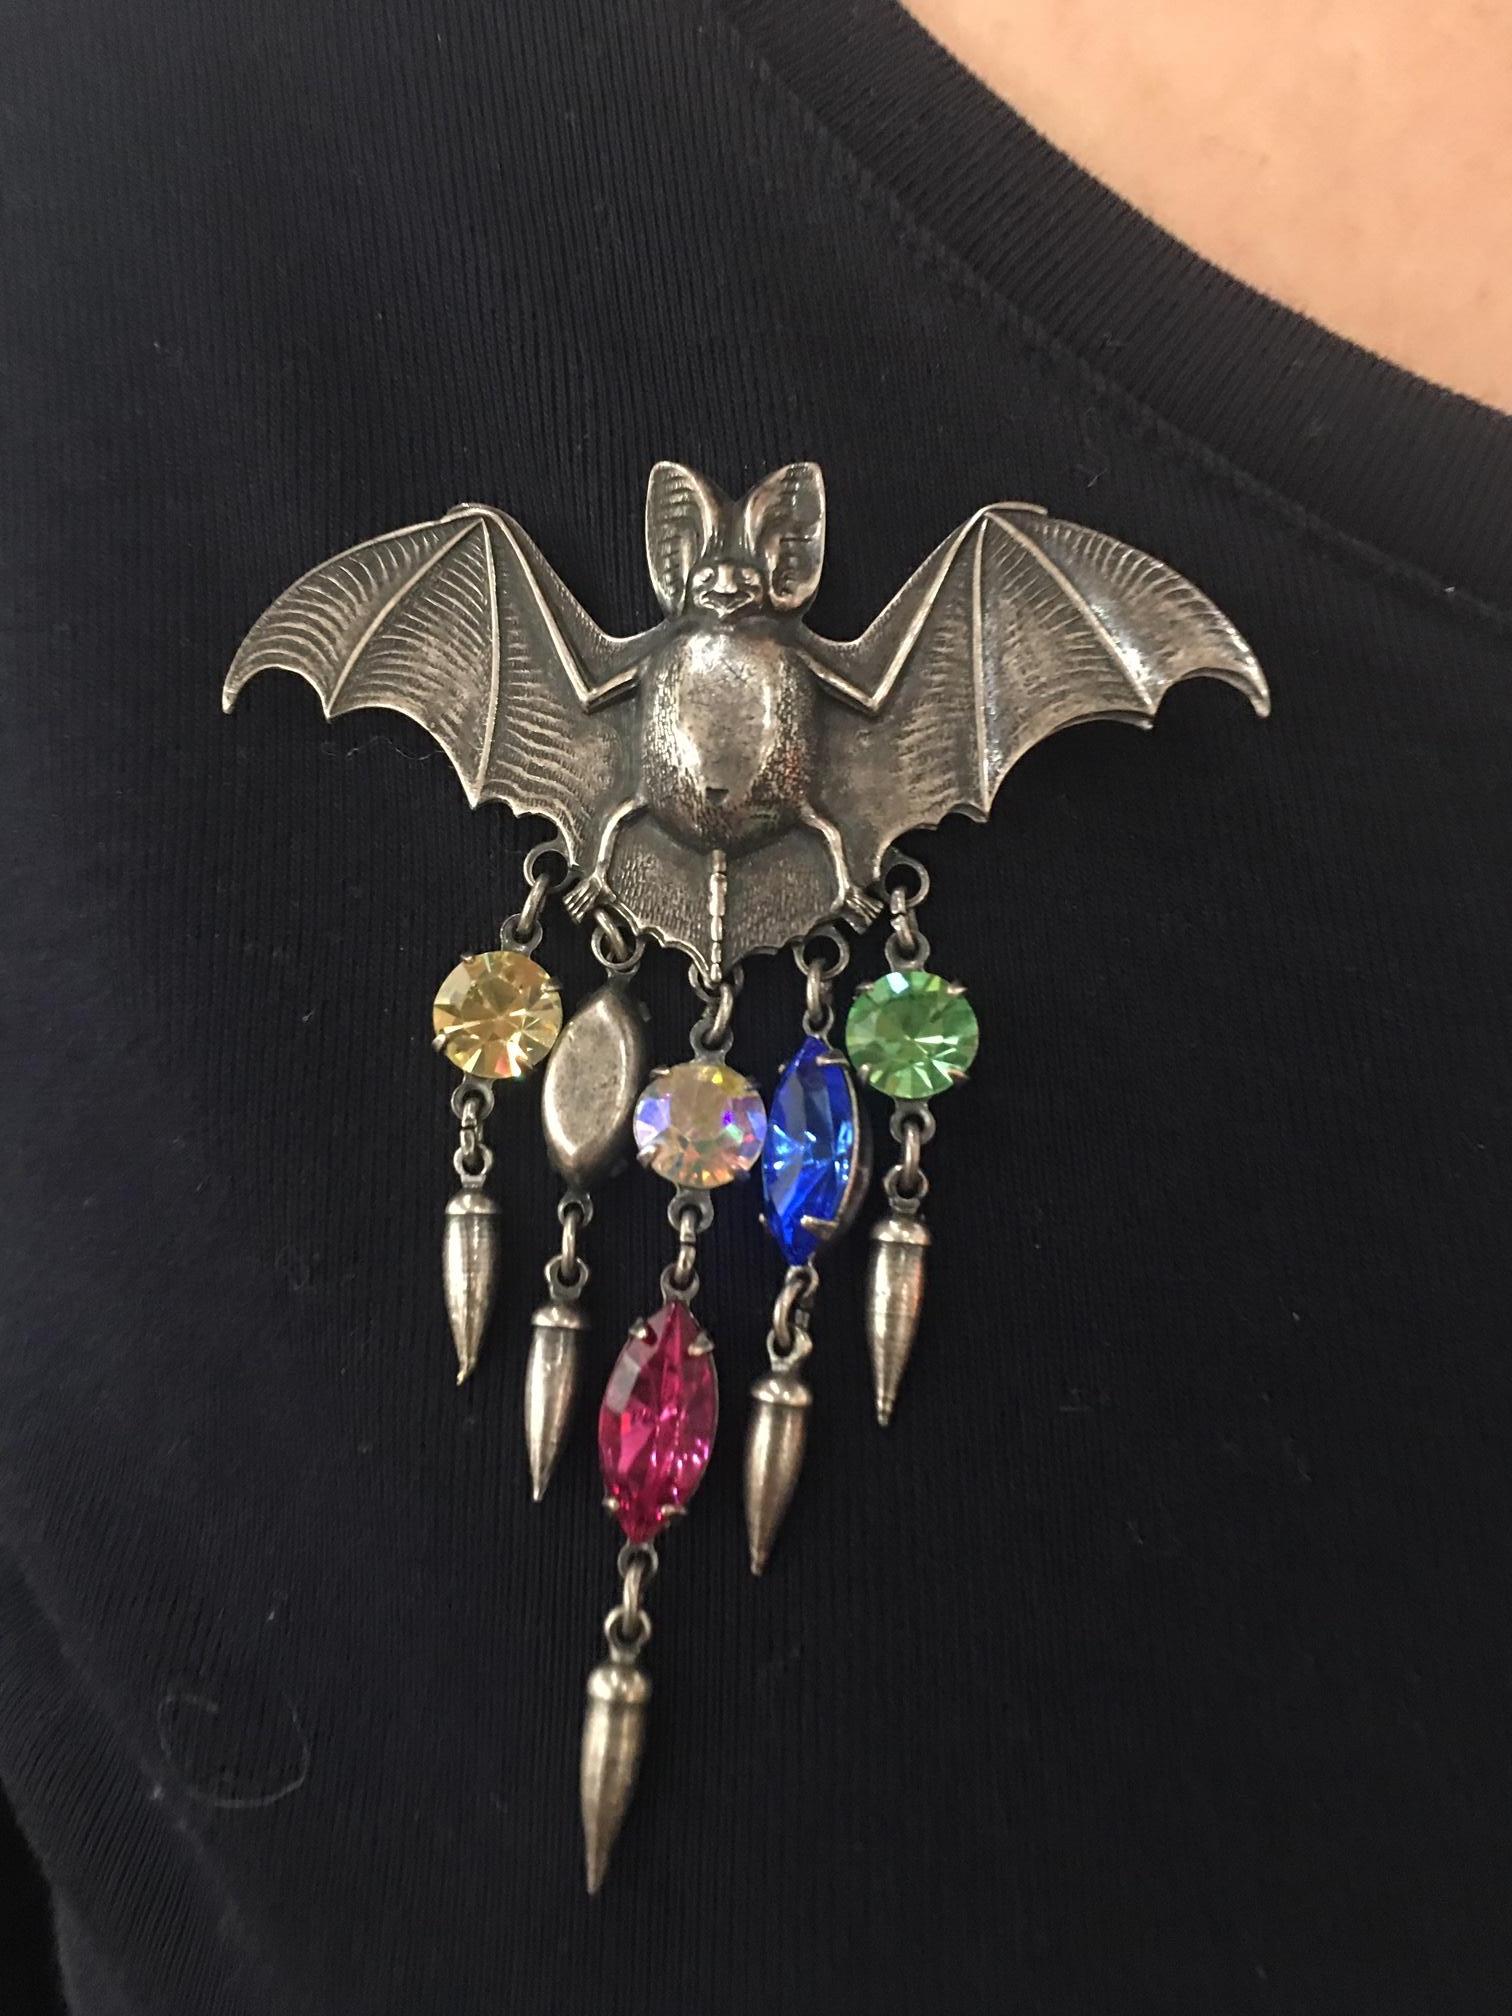 Whimsical and Fun Brooch featuring a Bat suspending Faux Gem enhancements; Signed Askew London; approx. 3.25 inches X 1.50 inches. Add your own Chic Style and Pizzazz to any outfit! To have, to hold, to keep Forever… An Heirloom to enjoy for